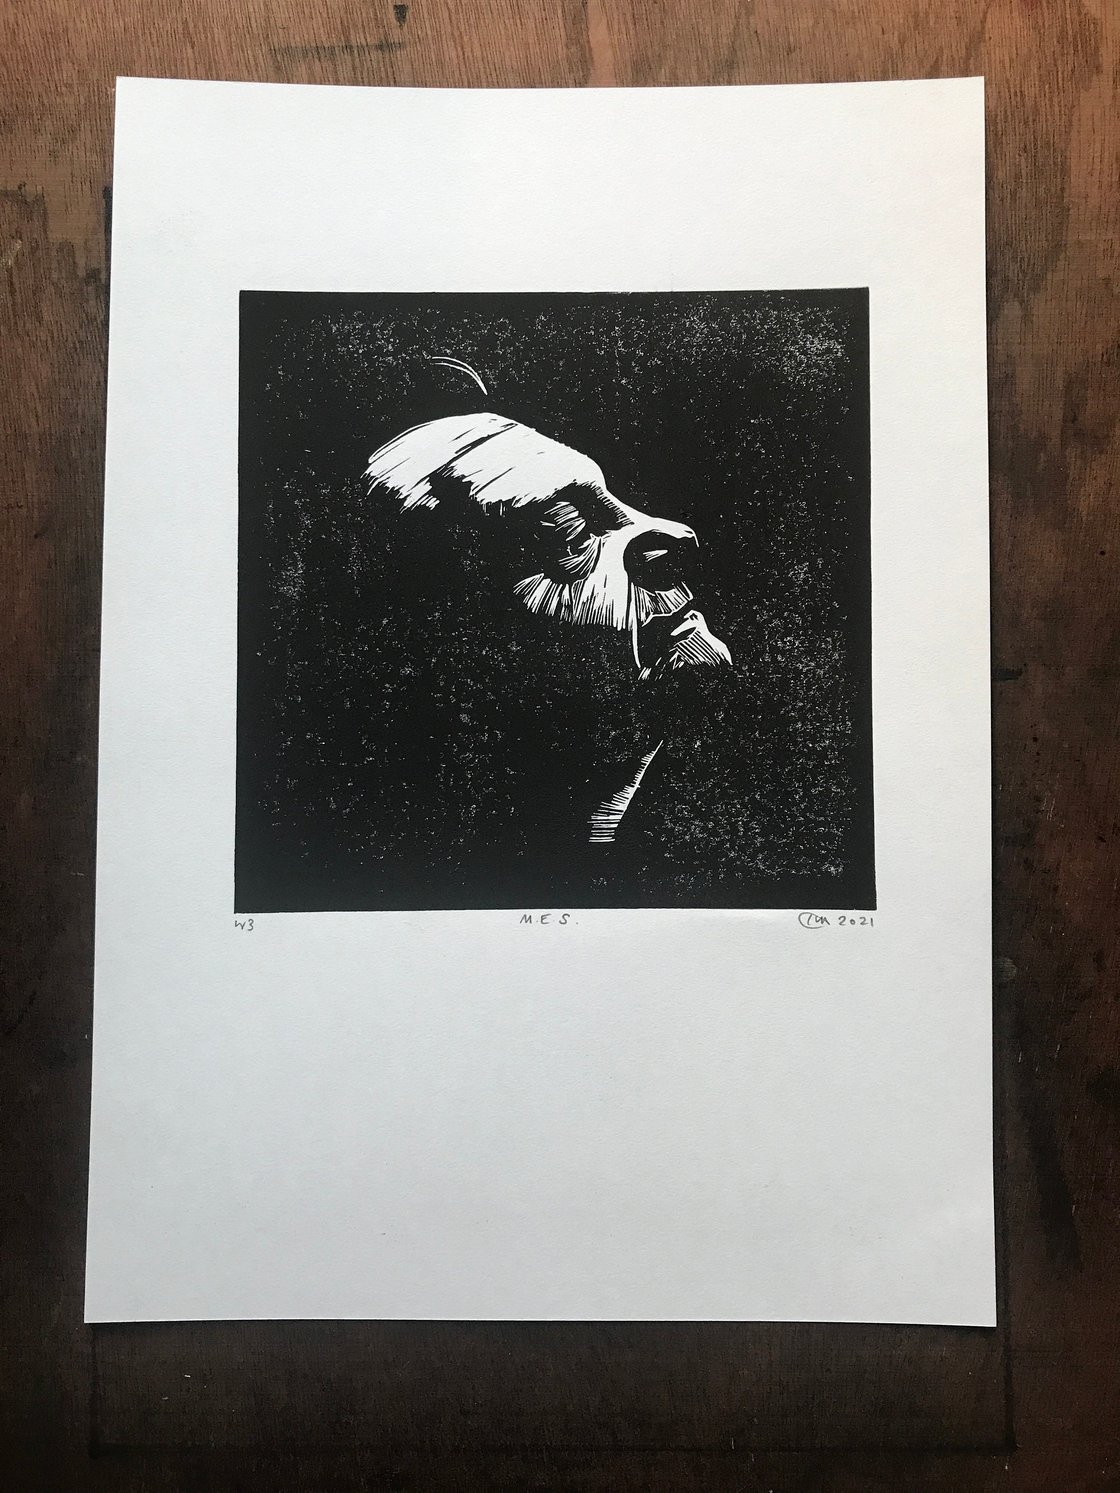 Image of Mark E. Smith. The Fall. Hand Made. Original A4 linocut print. Limited and Signed. Art.